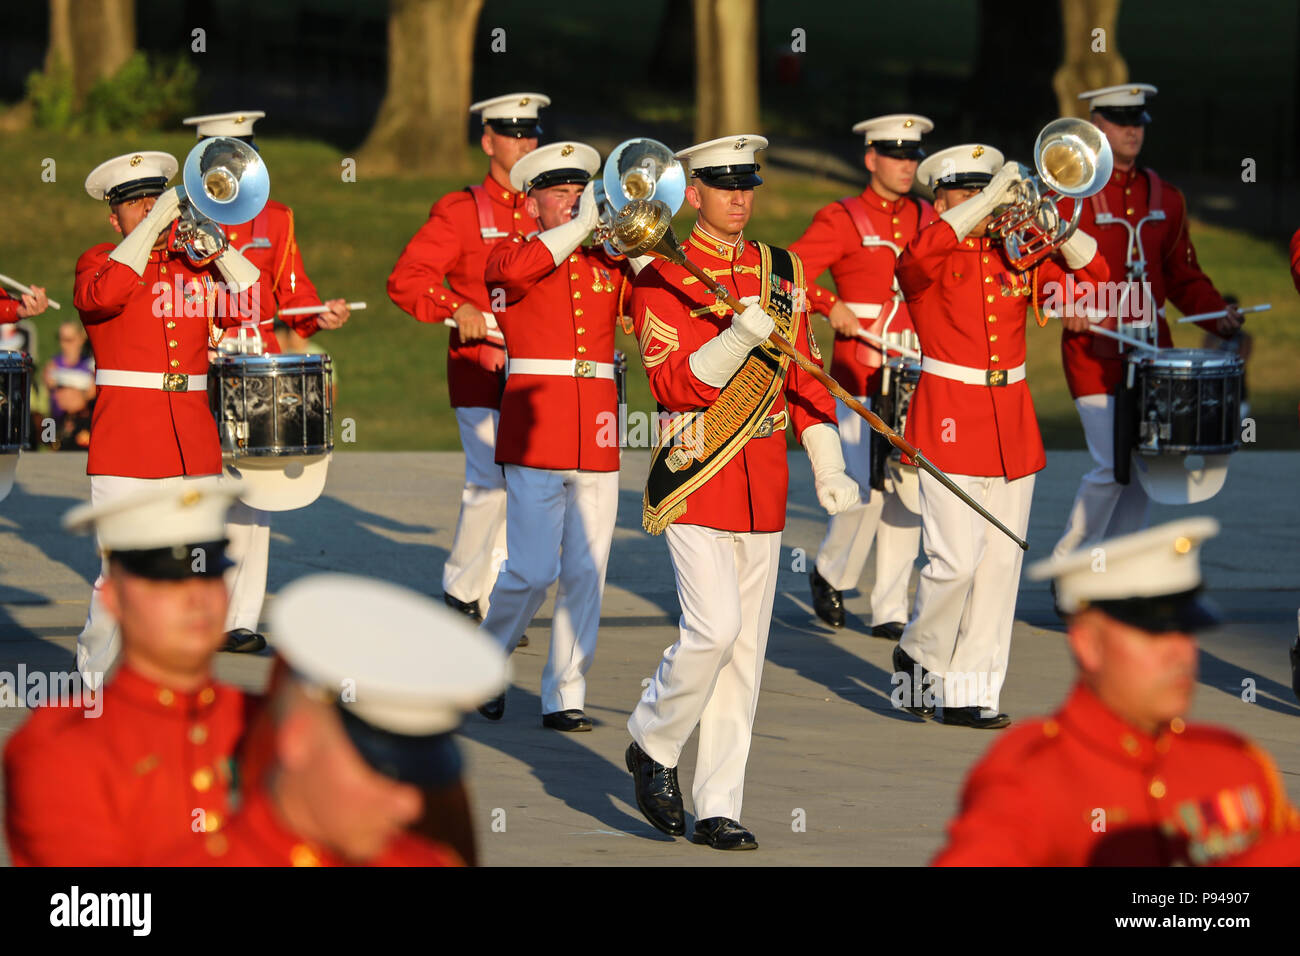 Marines with “The Commandant’s Own,” U.S. Marine Drum & Bugle Corps play a musical ballad during a Tuesday Sunset Parade at the Lincoln Memorial, Washington D.C., July 10, 2018. The guest of honor for the parade was the former Vice President of the U.S., Joe Biden, and the hosting official was the Staff Judge Advocate to the Commandant of the Marine Corps, Maj. Gen. John R. Ewers Jr. (Official Marine Corps photo by Cpl. Damon Mclean/Released) Stock Photo